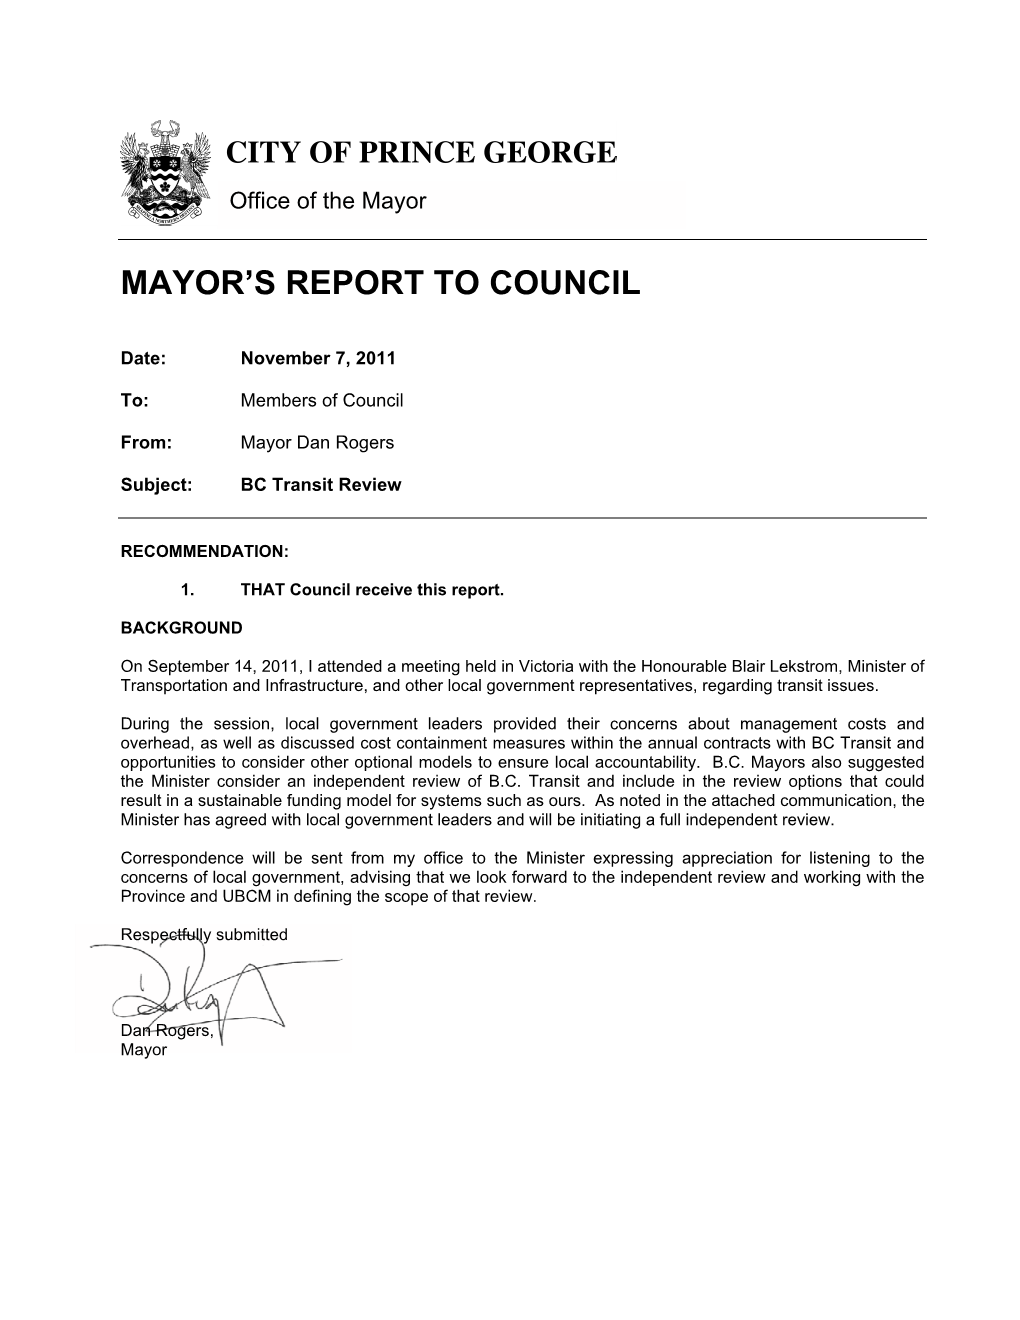 Mayor's Report to Council